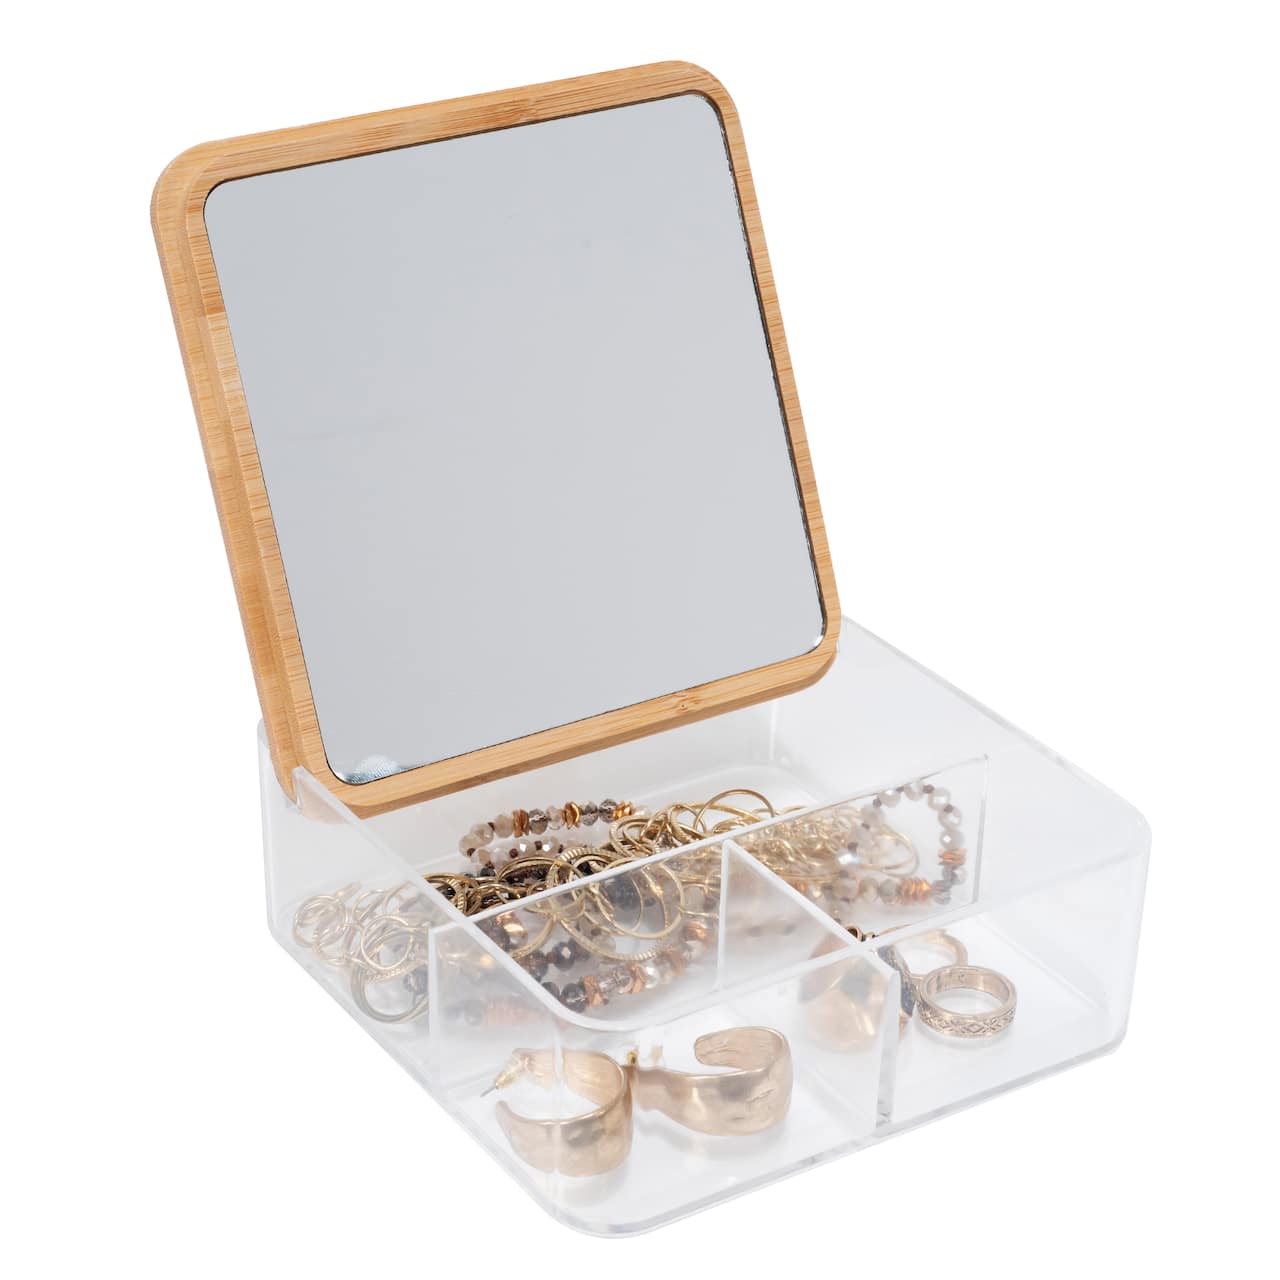 Simplify 3 Compartment Clear Organizer with Bamboo Lid and Mirror